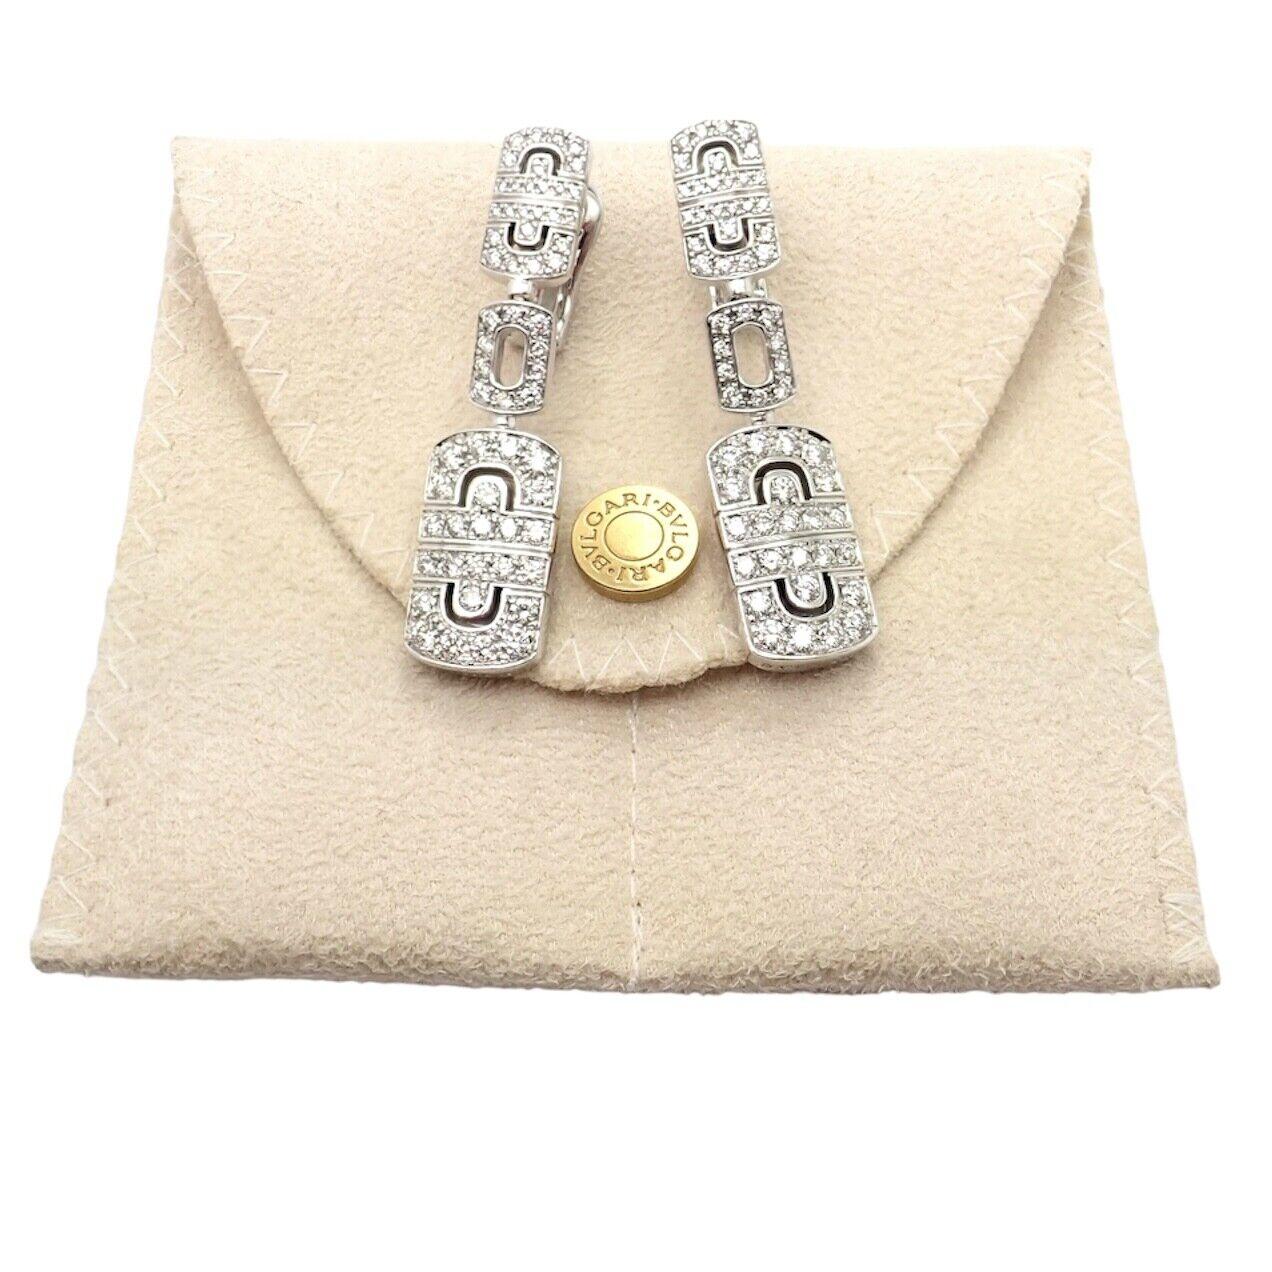 18k White Gold Diamond Parentesi Drop Dangle Earrings by Bulgari. 
With 116 round brilliant cut diamonds VS1 clarity, G color total weight approx. 2.25ctw
These earrings are made for pierced ears.
Details:
Measurements: 10.5mm x 44mm
Weight: 19.5